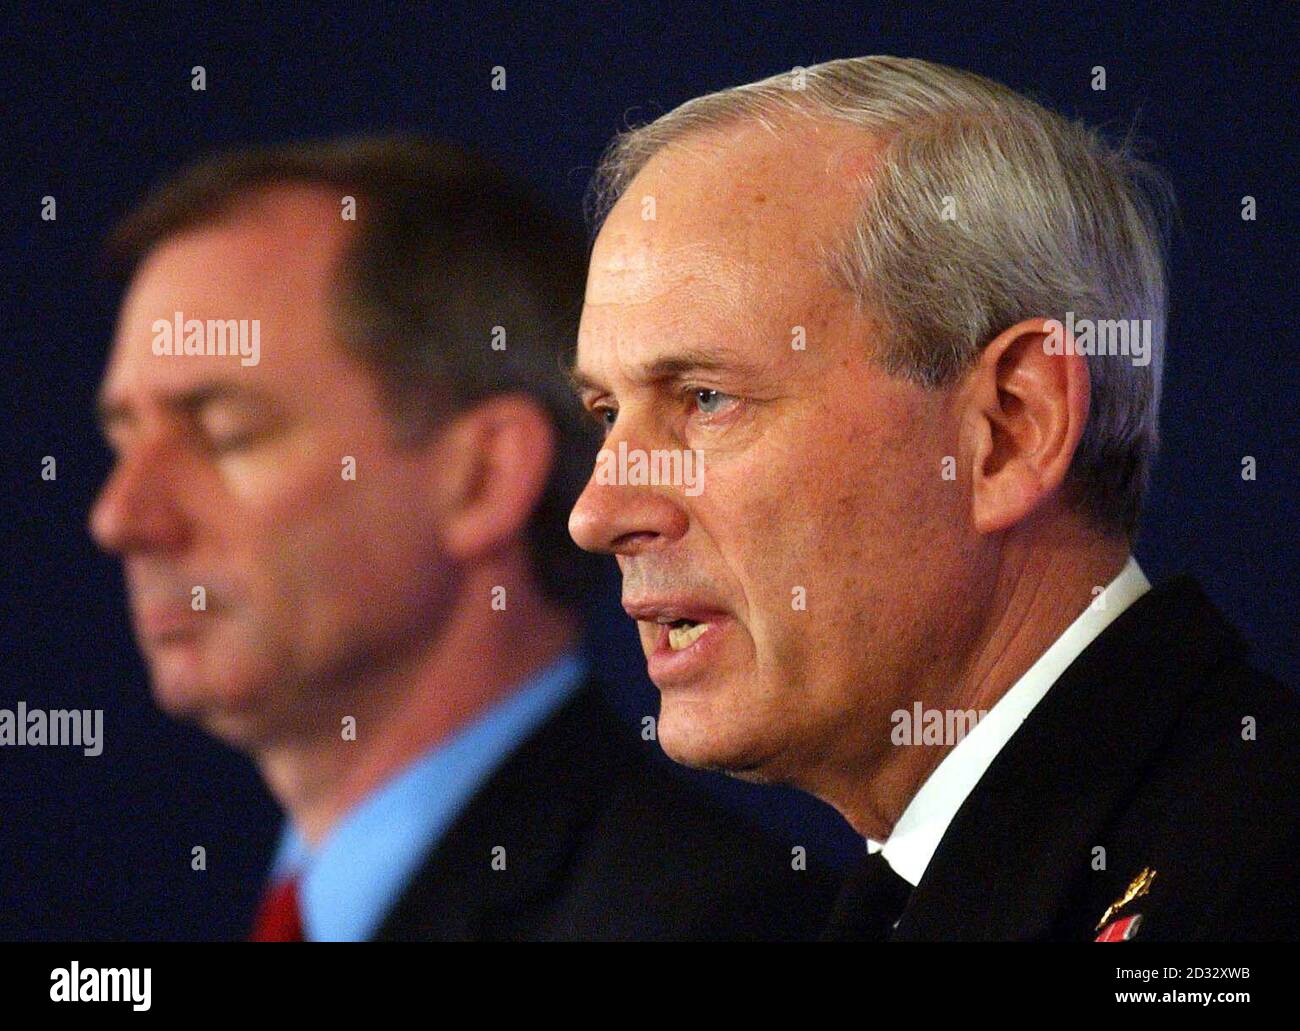 Geoff Hoon (left) the Minister of Defence with Admiral Sir Michael Boyce the Chief of the Defence staff, talking about the first British casualties suffered in the Iraq war, at a press briefing in central London. Coalition forces are on the outskirts of Iraq s second largest city Basra, *..the UK's Chief of Defence Staff Admiral Sir Michael Boyce said. Addressing the first of regular Ministry of Defence briefings on the progress of the war, Sir Michael gave details of British commandos' capture of the Al Faw peninsula and its vital oil infrastructure, as well as the American seizure of the Stock Photo